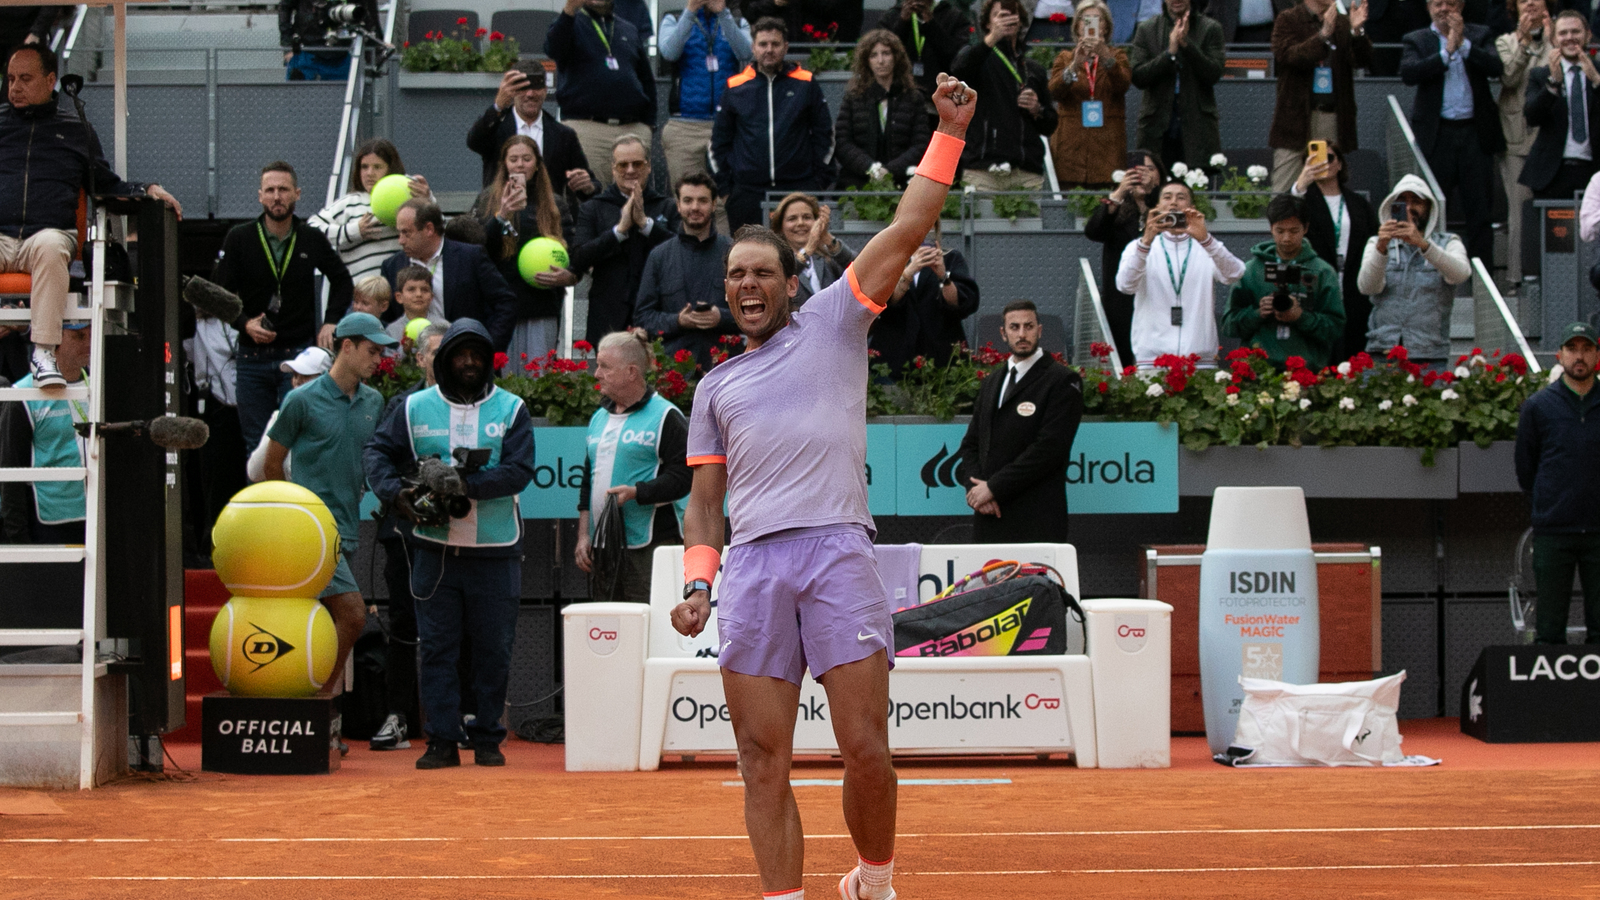 Watch: Rafael Nadal greeted like a king as he steps on Madrid court for R3 matchup against Pedro Cachin